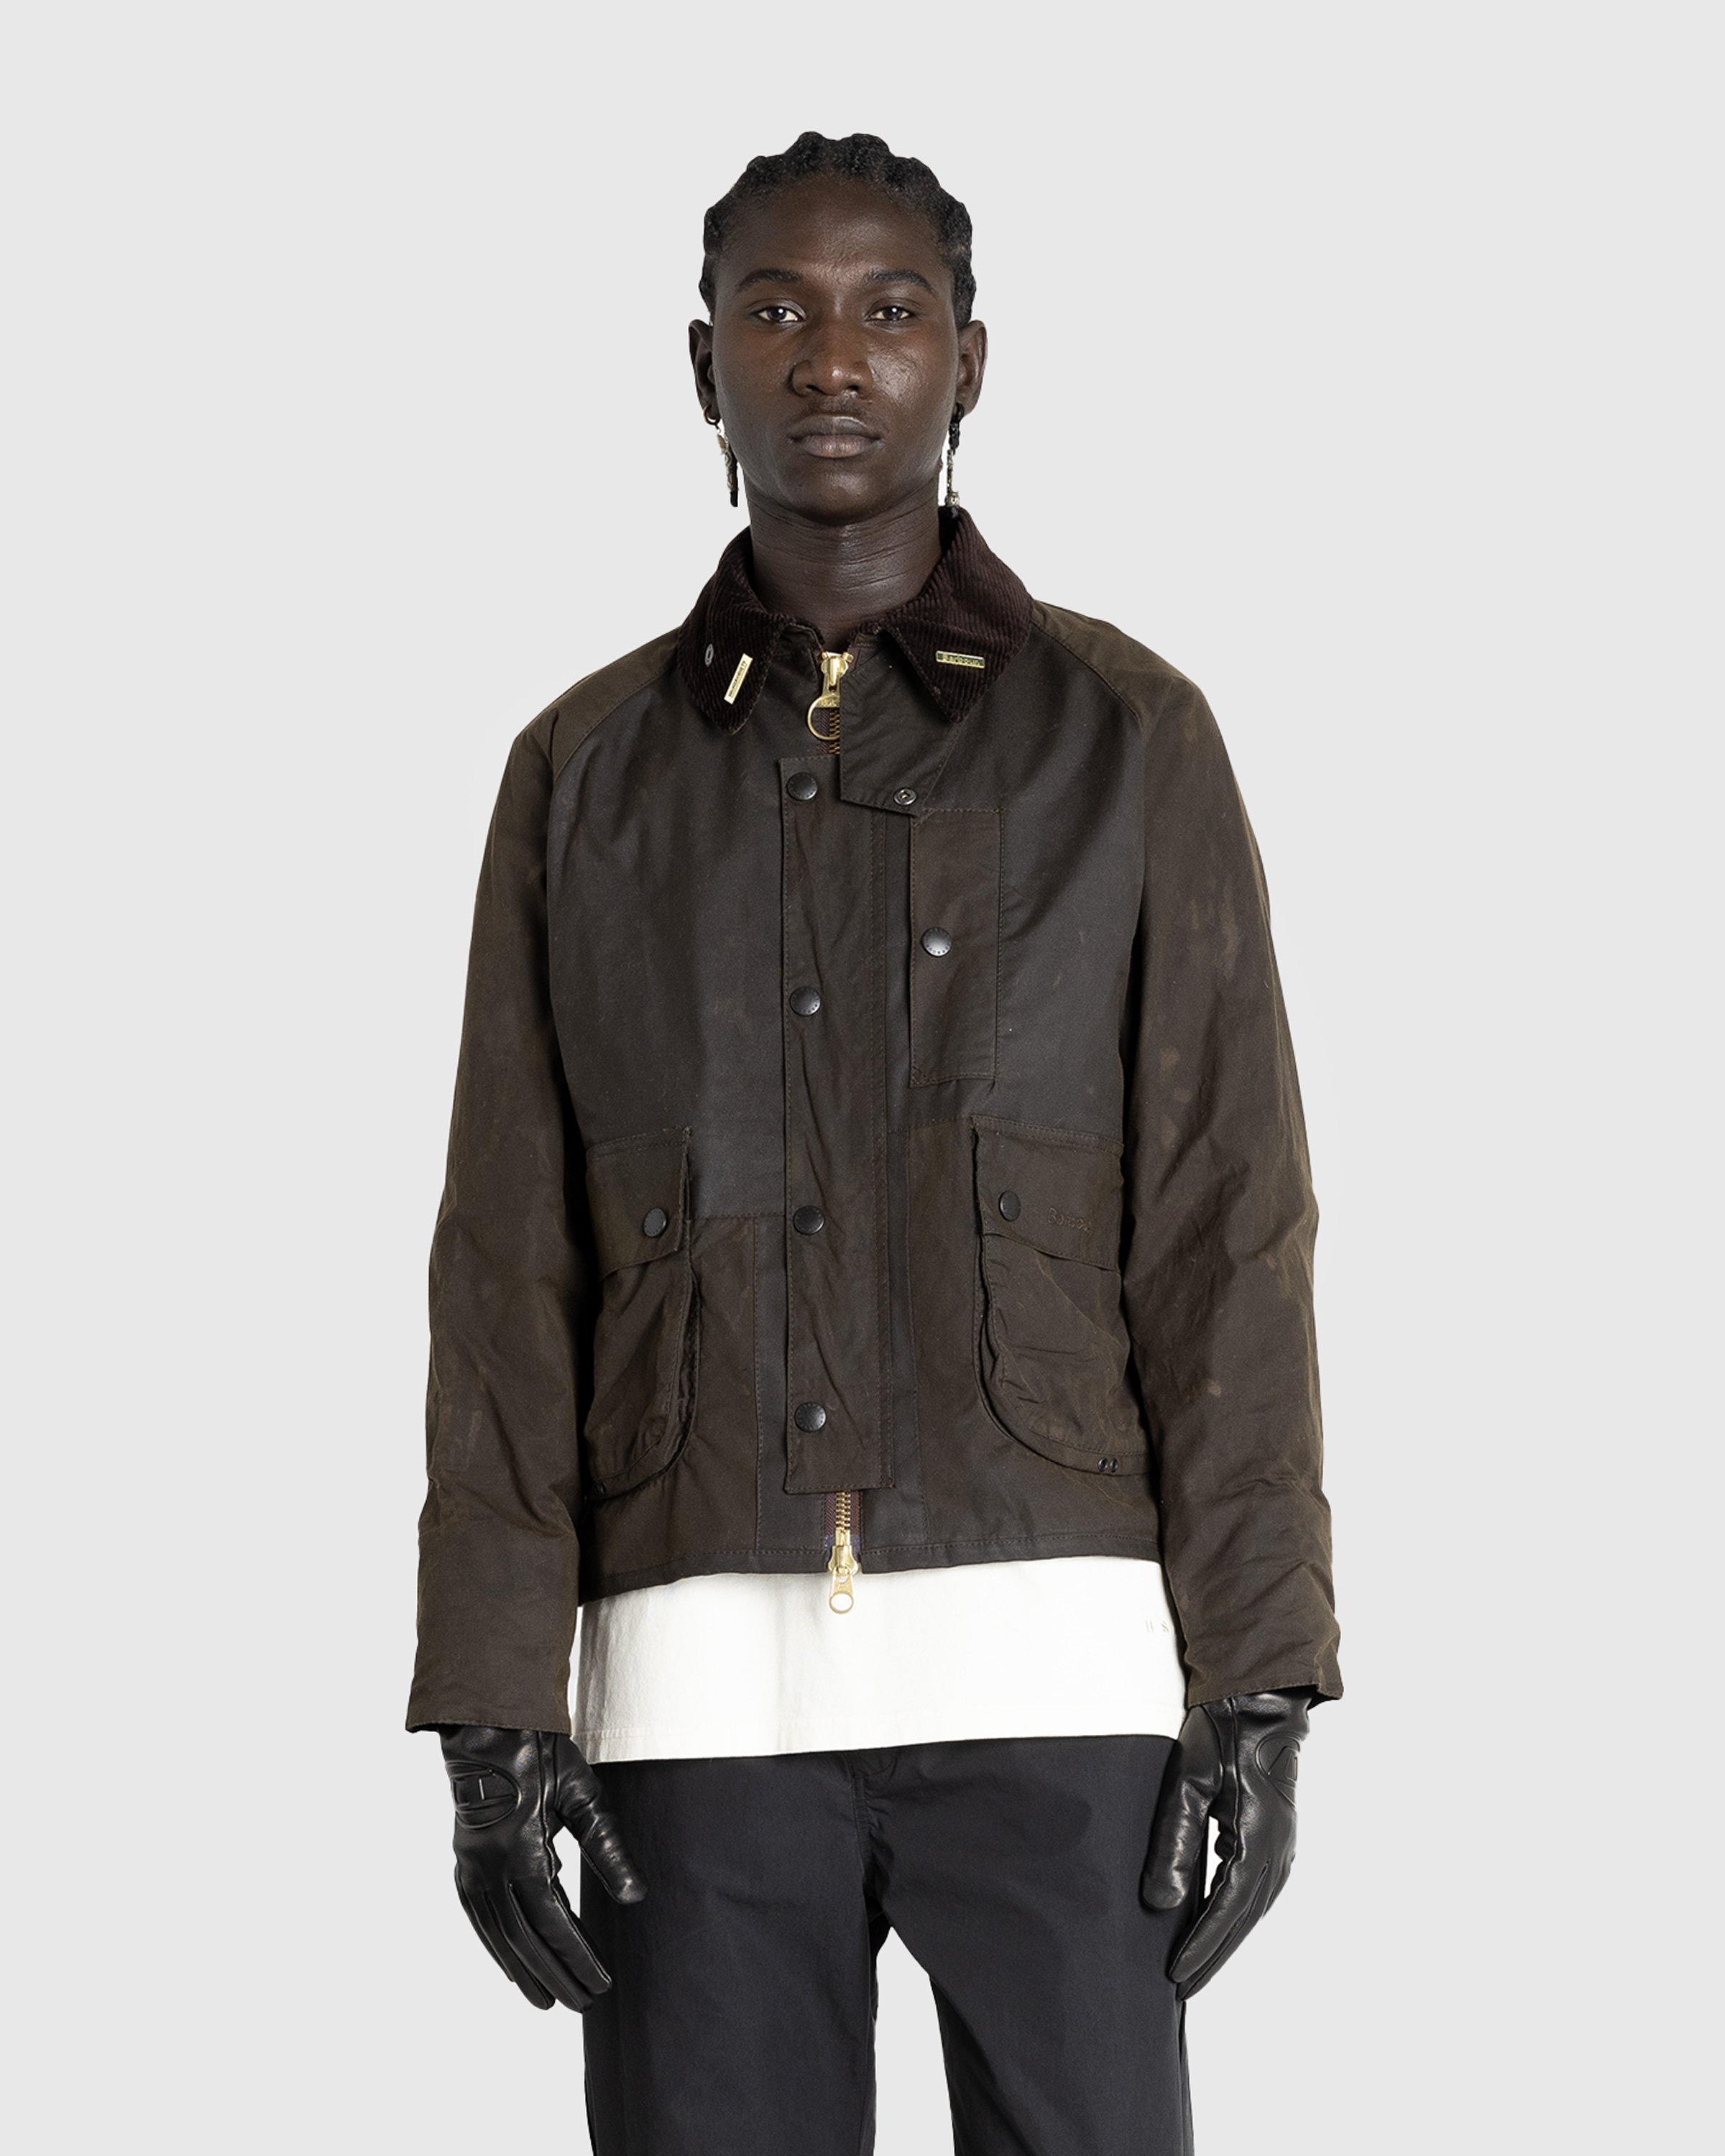 Barbour x Highsnobiety - Re-Loved Cropped Bedale Jacket 1 - 34 - Olive-Green - Clothing - Olive - Image 5